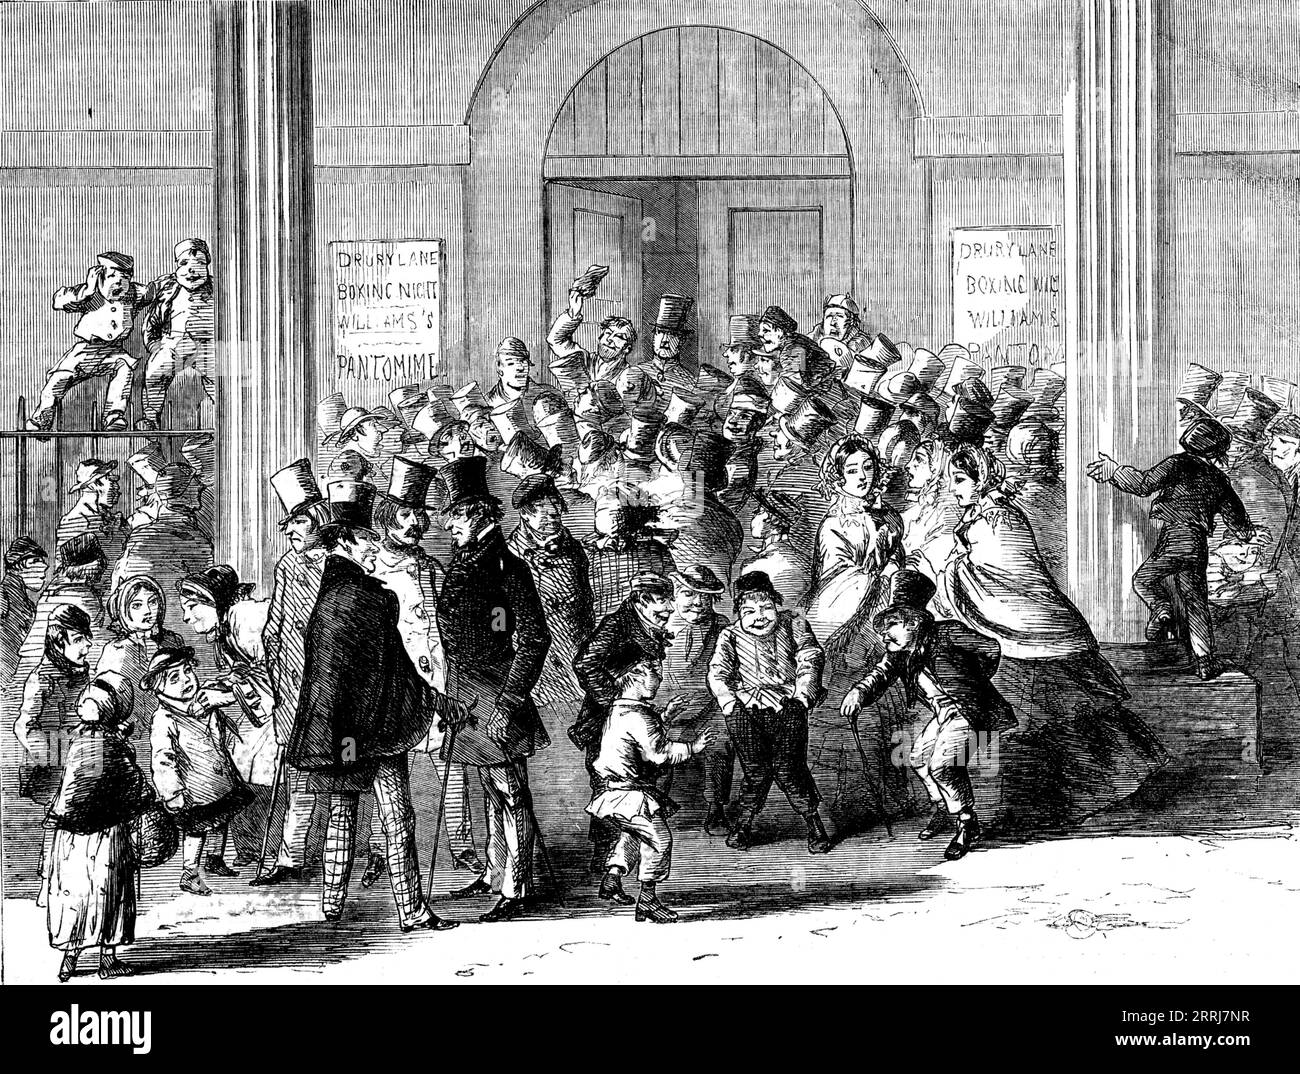 Drury-Lane Theatre - Engaging for the Pantomime - drawn by M'Connell, 1858. '...a curious Scene at the stage-door...every available place was occupied round about the theatre by a crowd of persons desirous of being engaged in the forthcoming pantomime. The theme of the piece may be more than usually attractive. The ballad story of &quot;Robin Hood&quot; is undeniably popular, and his merry band, it might have been expected, would be more than usually numerous...a large multitude of applicants surrounded Old Drury with the strong desire, and some with the reasonable expectation, of being engage Stock Photo